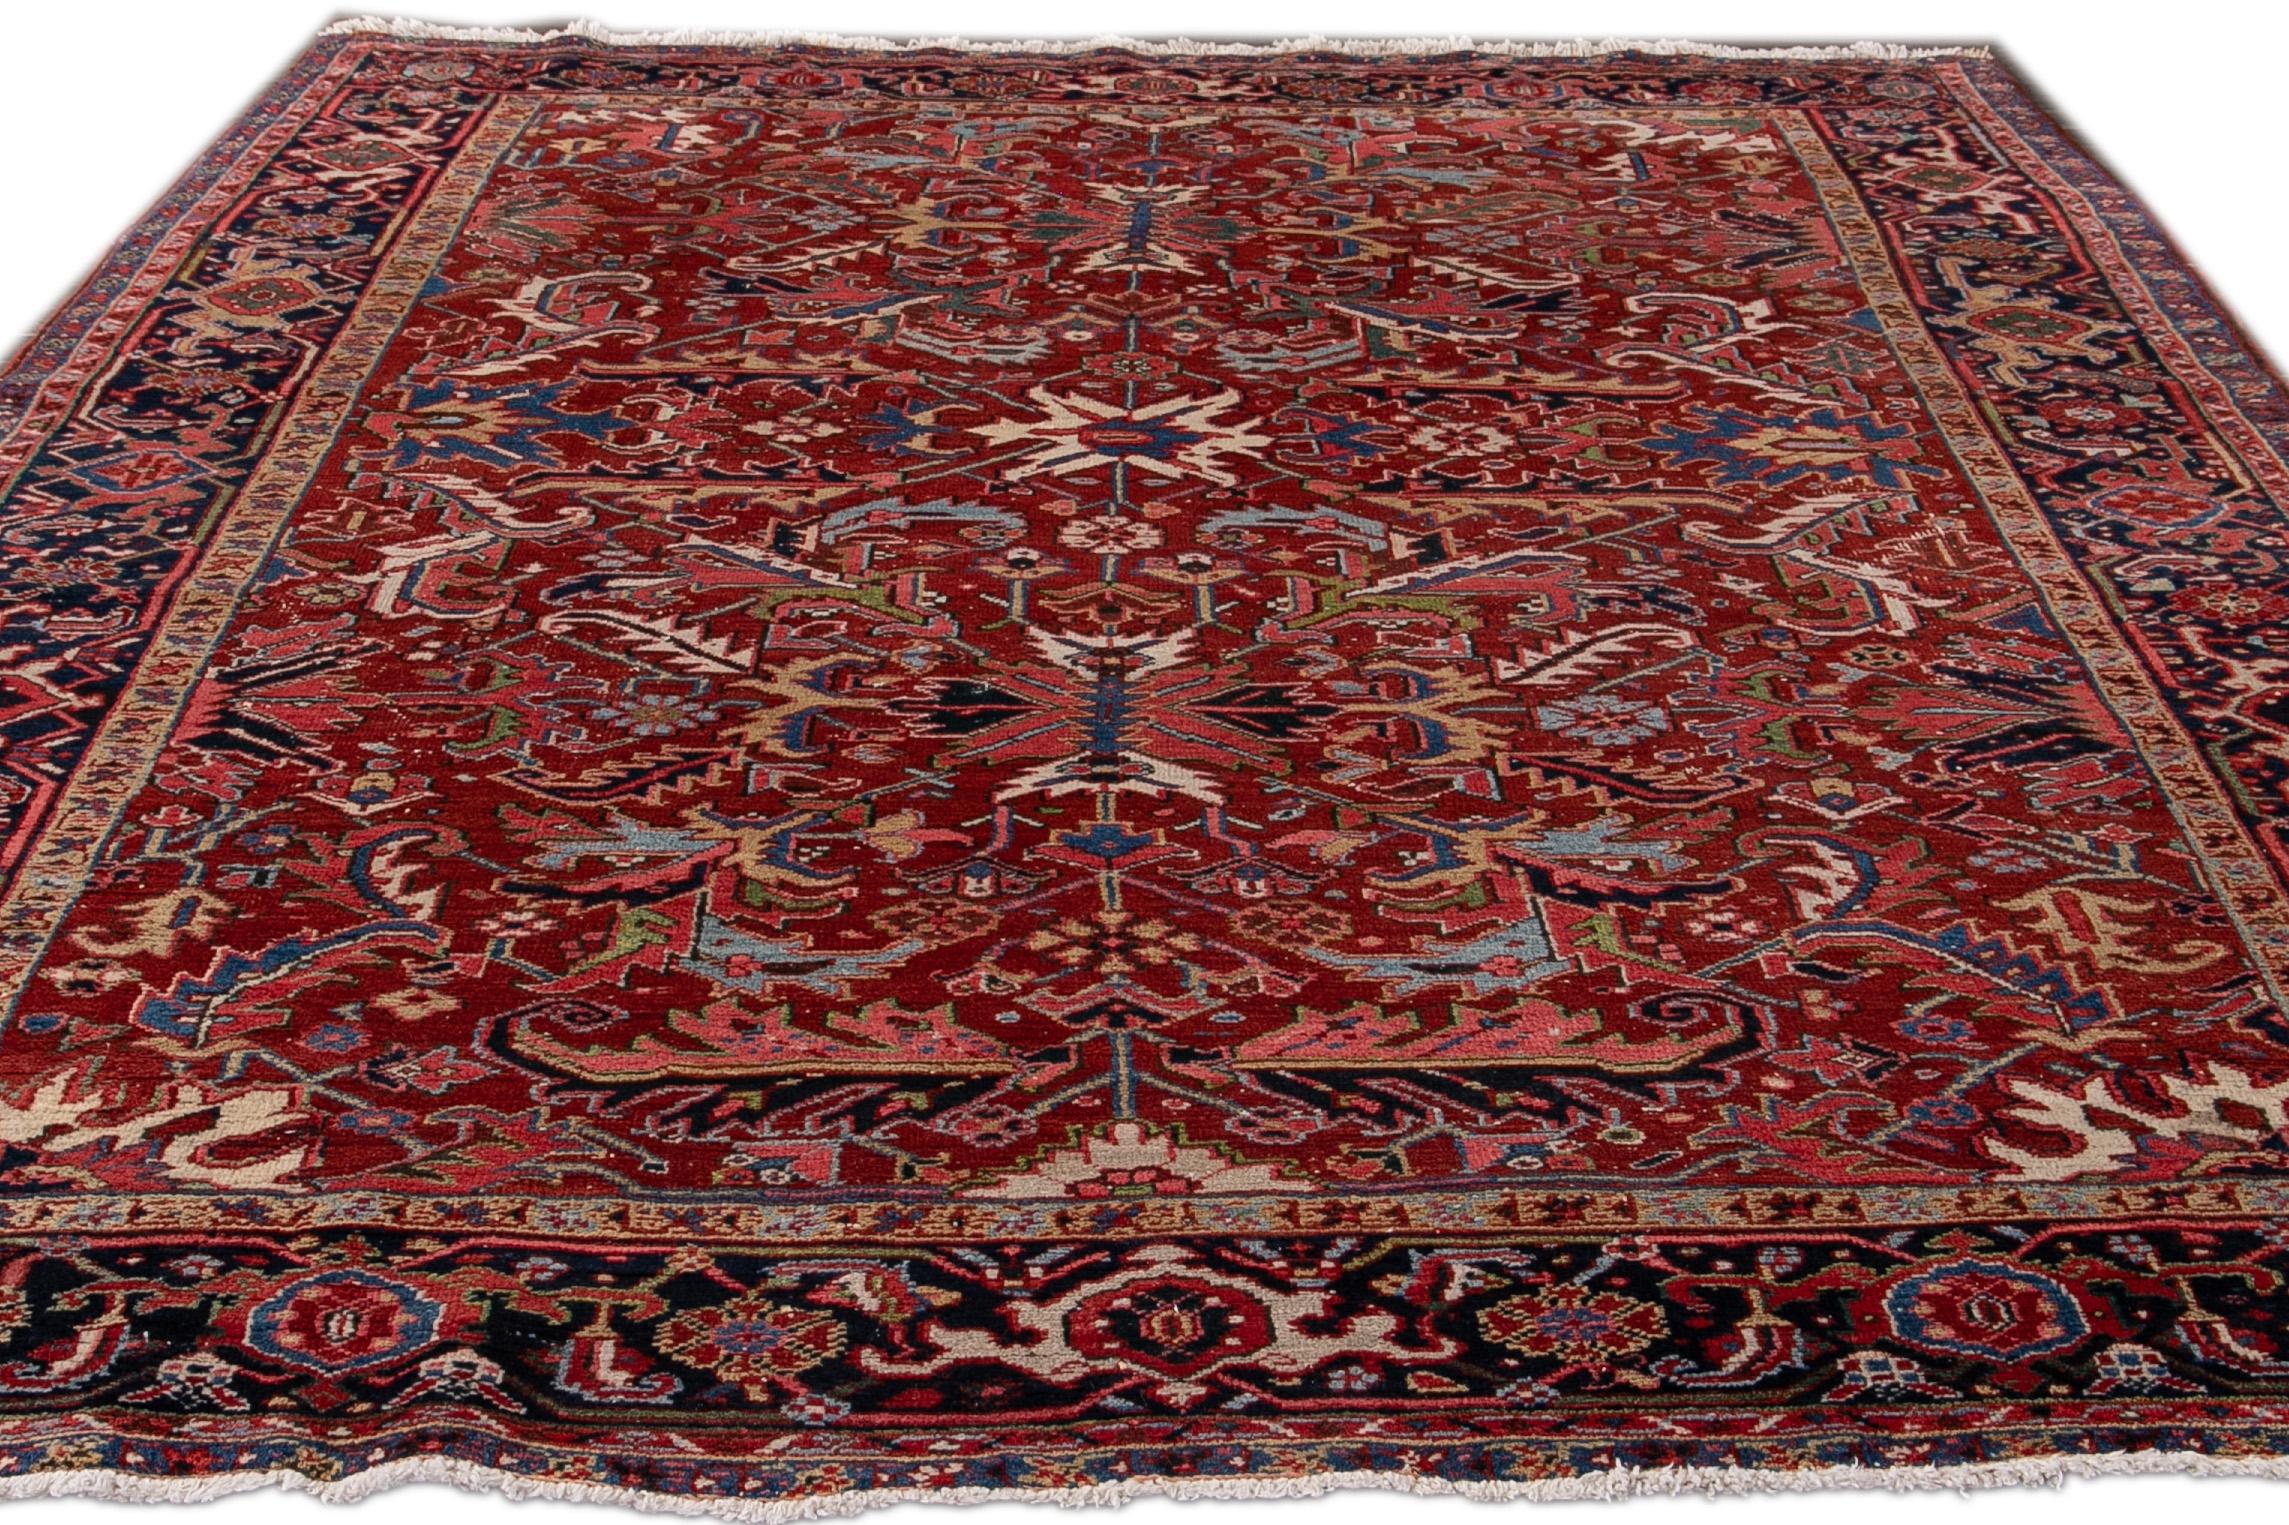 Beautiful antique Persian Heriz hand-knotted wool rug with a red field. This Serapi rug has a navy-blue frame and multi-color accents in an all-over gorgeous geometric medallion floral design.

This rug measures: 8' x 10'1